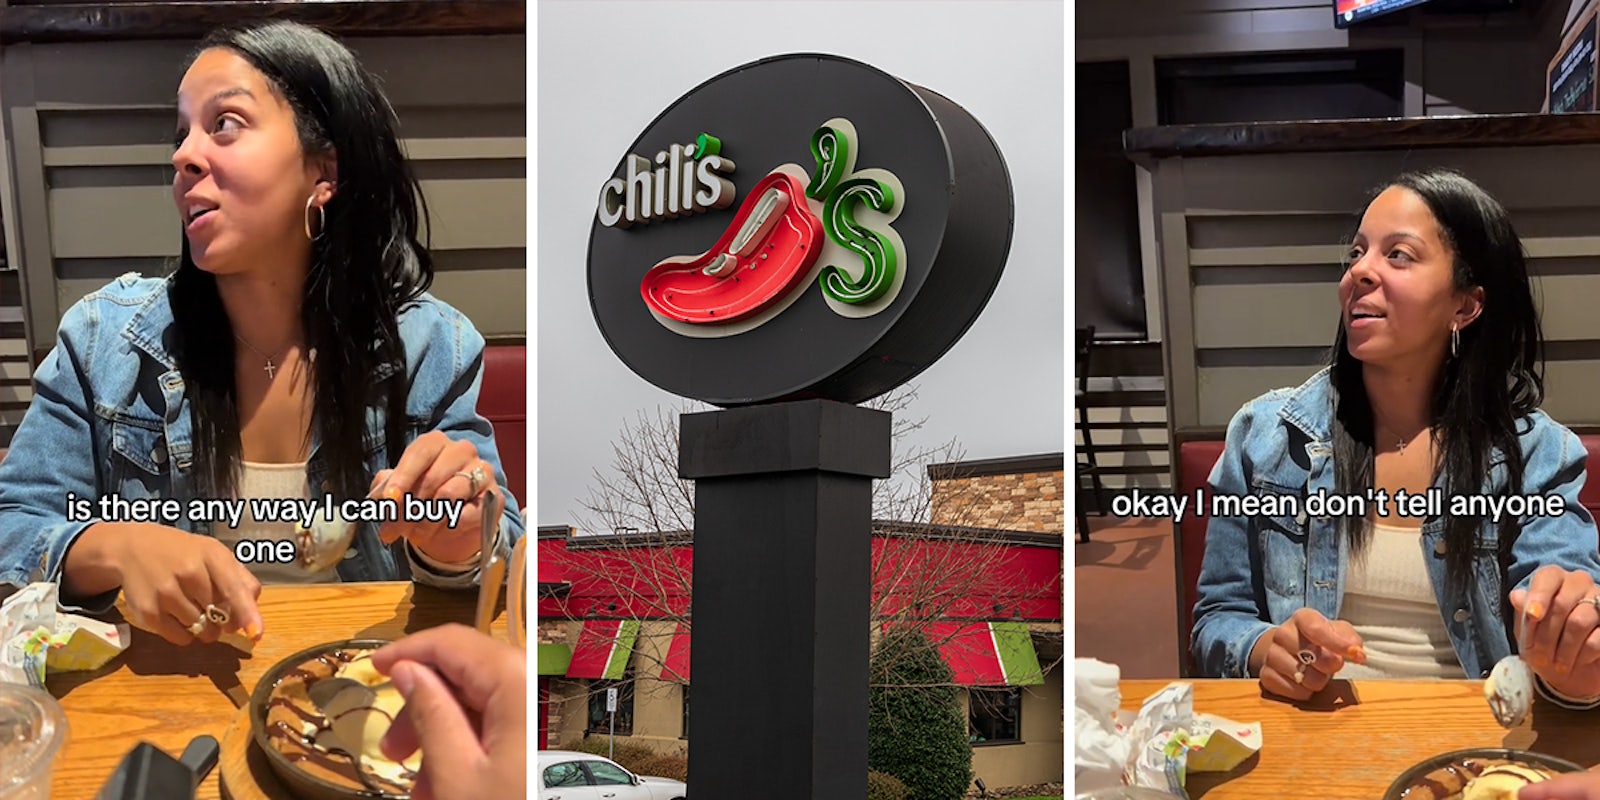 Chili's customer speaking with caption 'is there any way I can buy one' (l) Chili's sign (c) Chili's customer speaking with caption 'okay I mean don't tell anyone' (r)